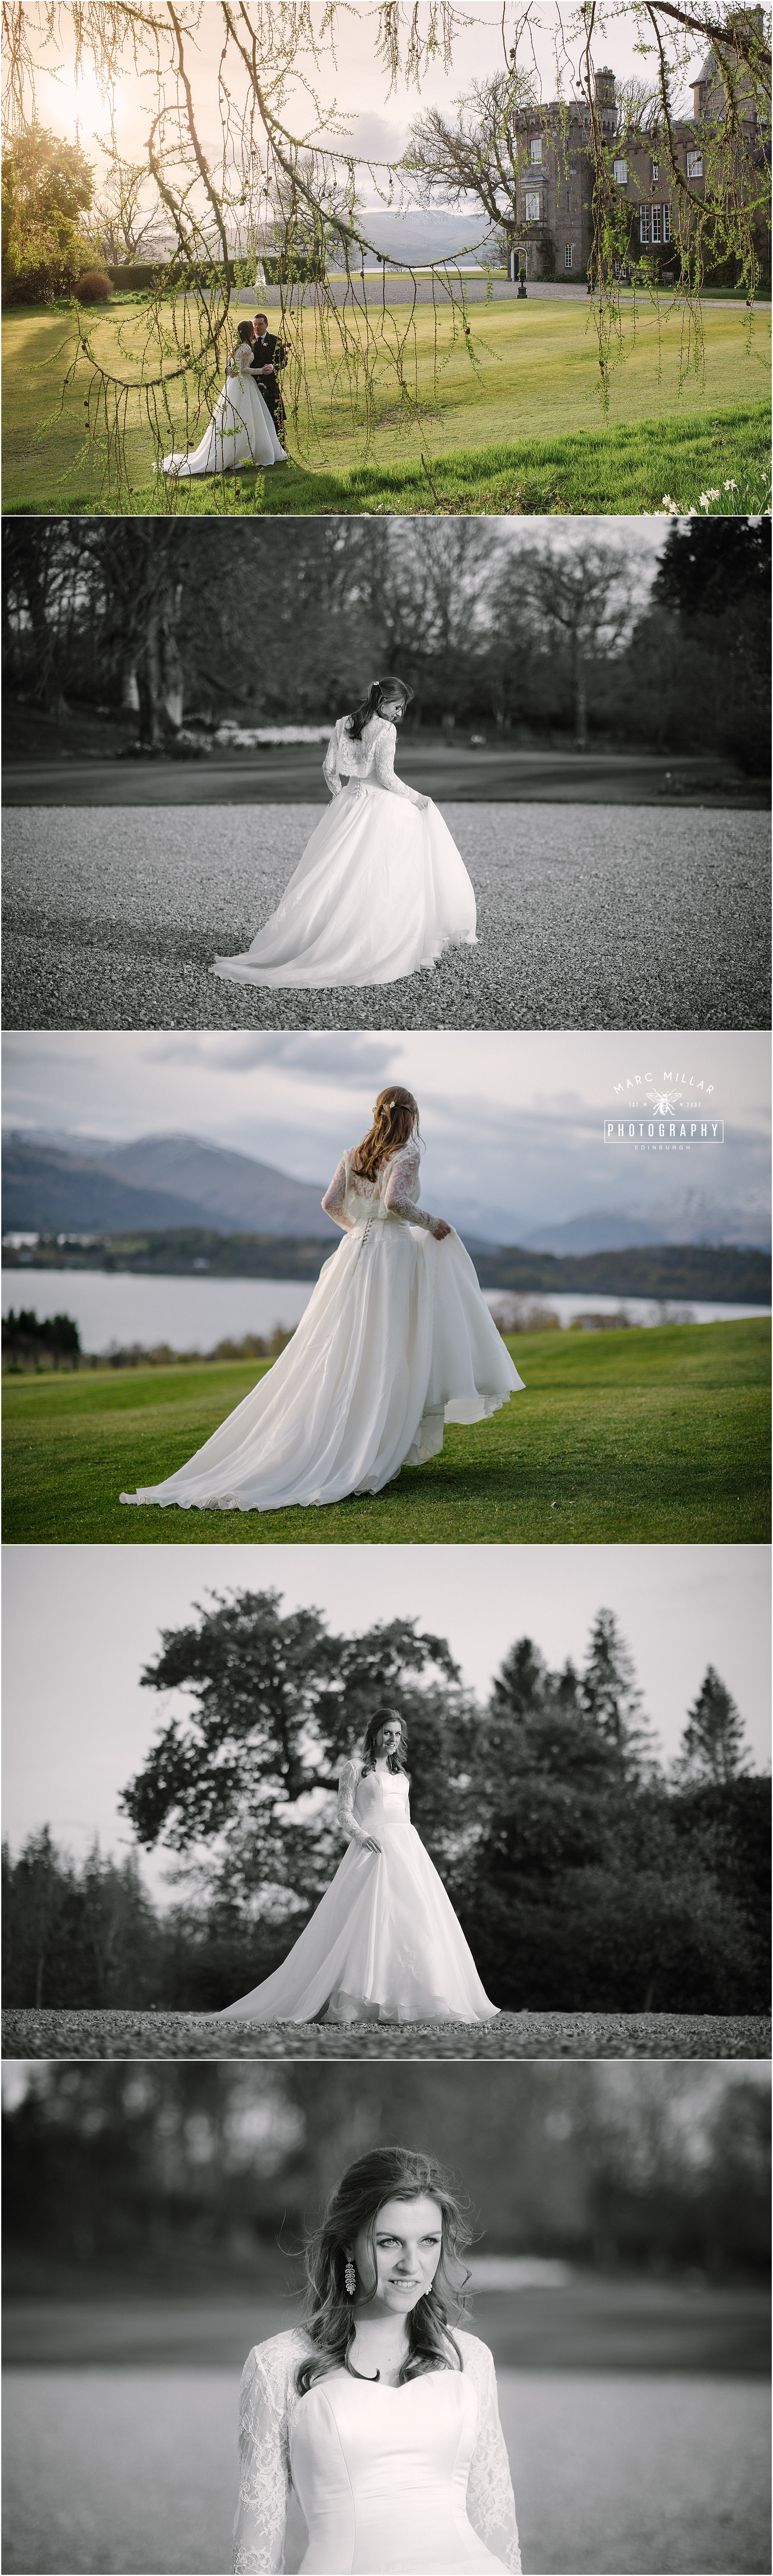  Boturich Castle Wedding Photography by Marc Millar Photography 